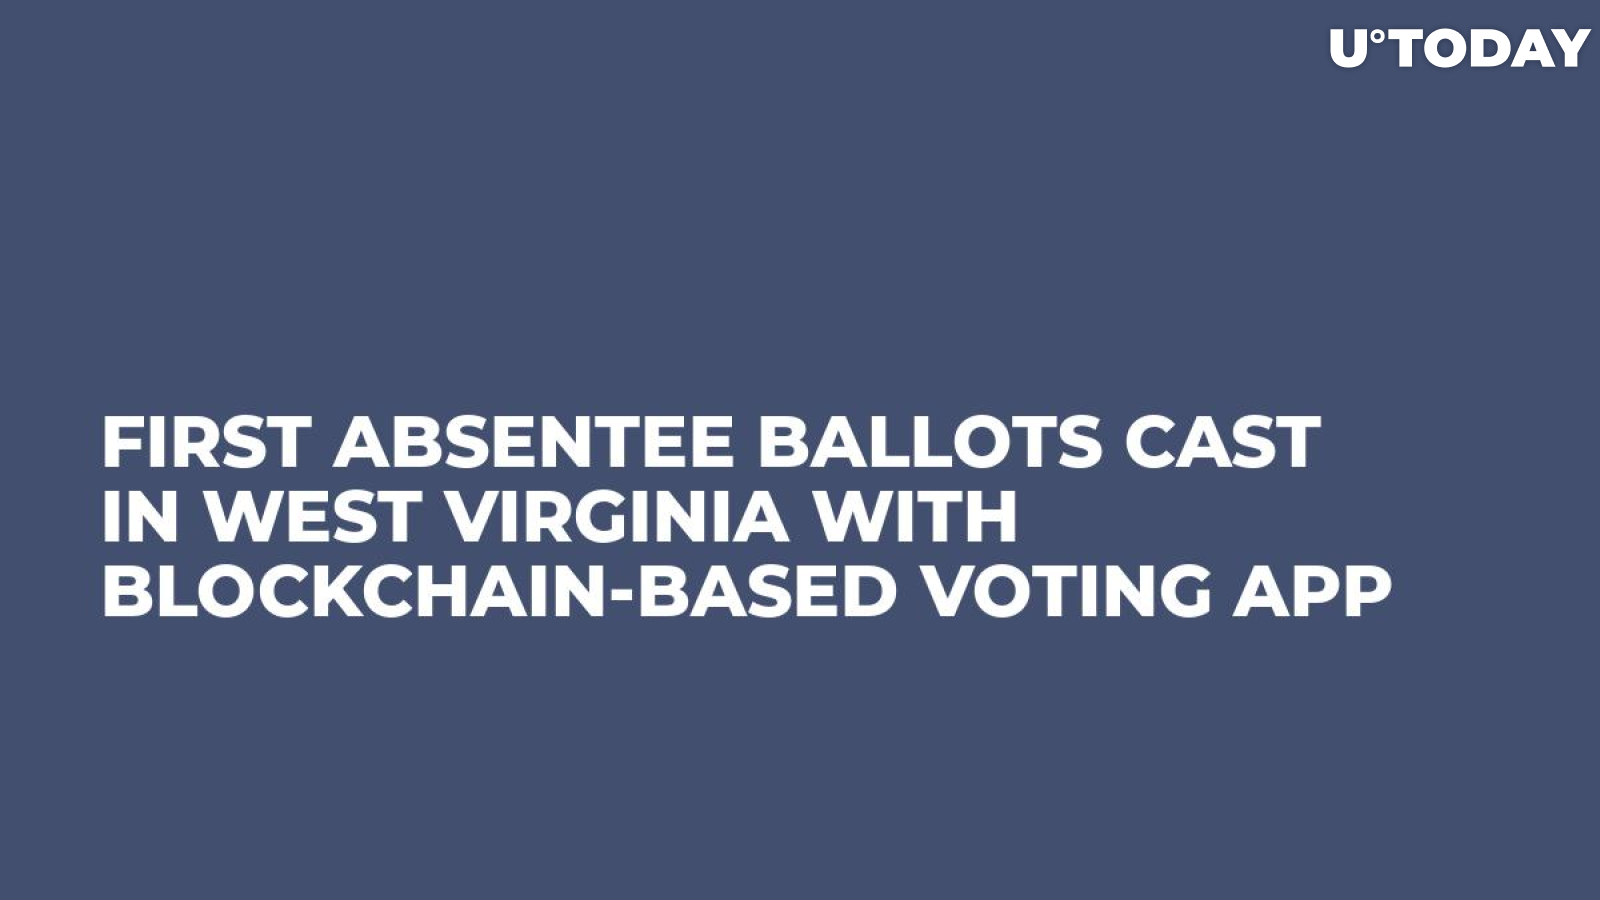 First Absentee Ballots Cast in West Virginia With Blockchain-Based Voting App 